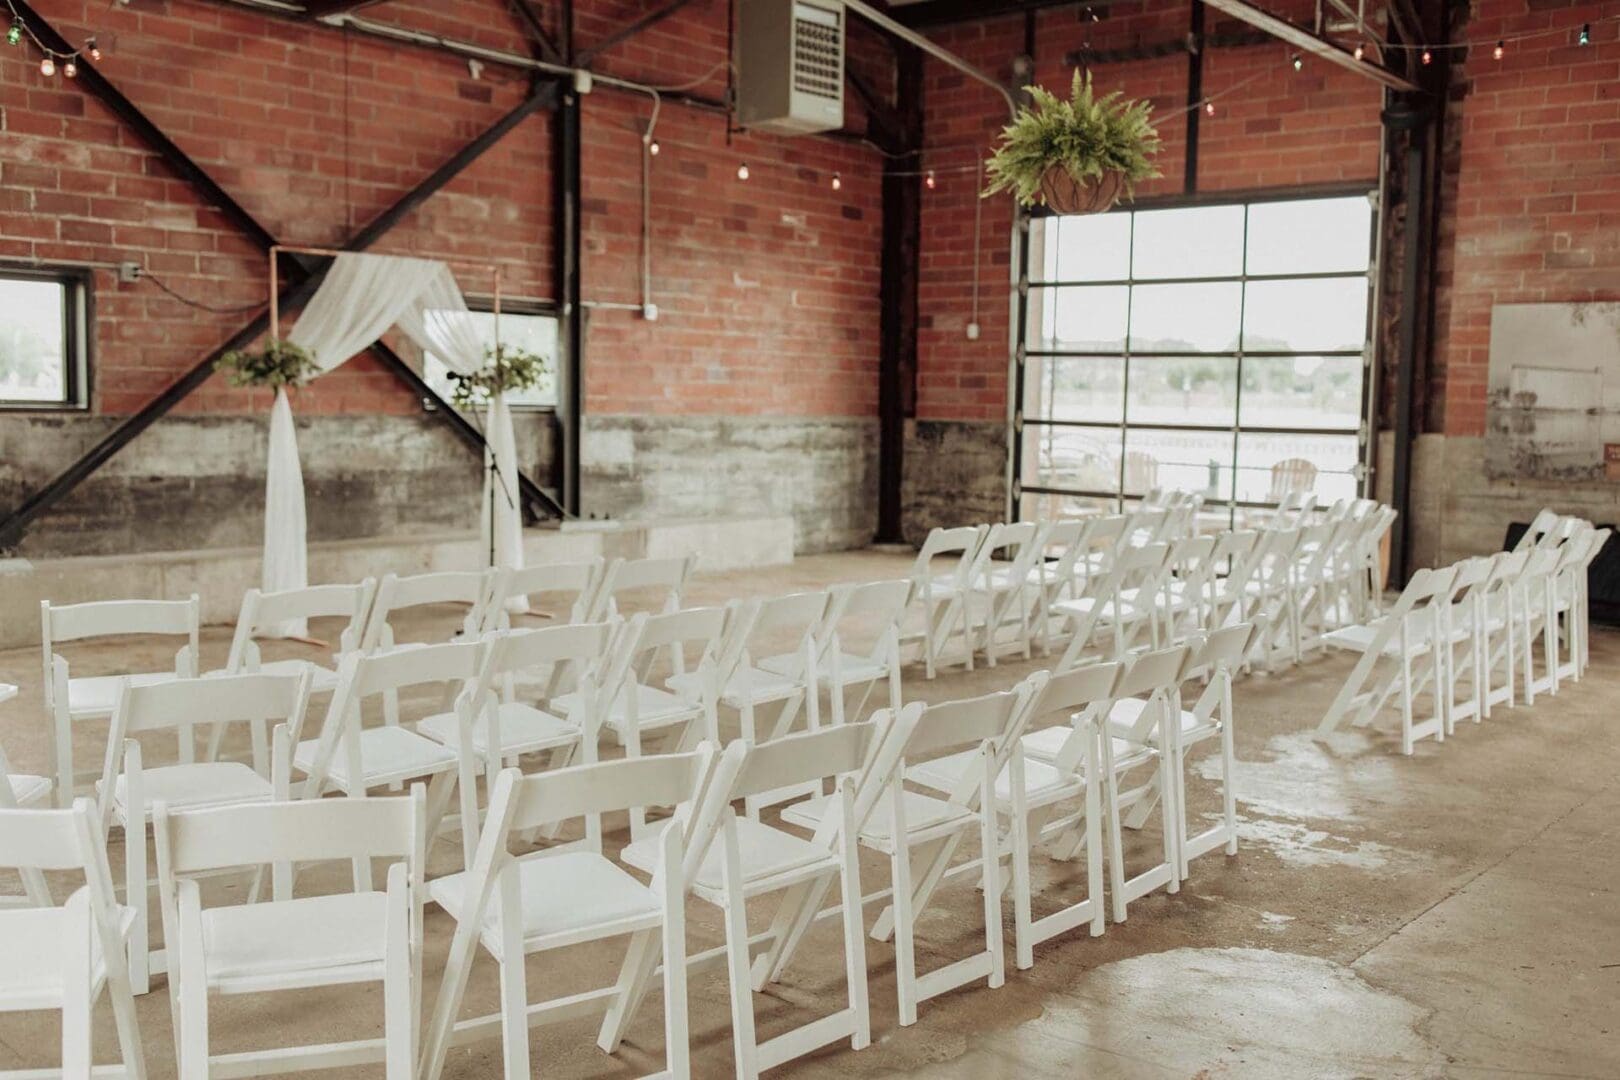 Interior of City House with white chairs for wedding event